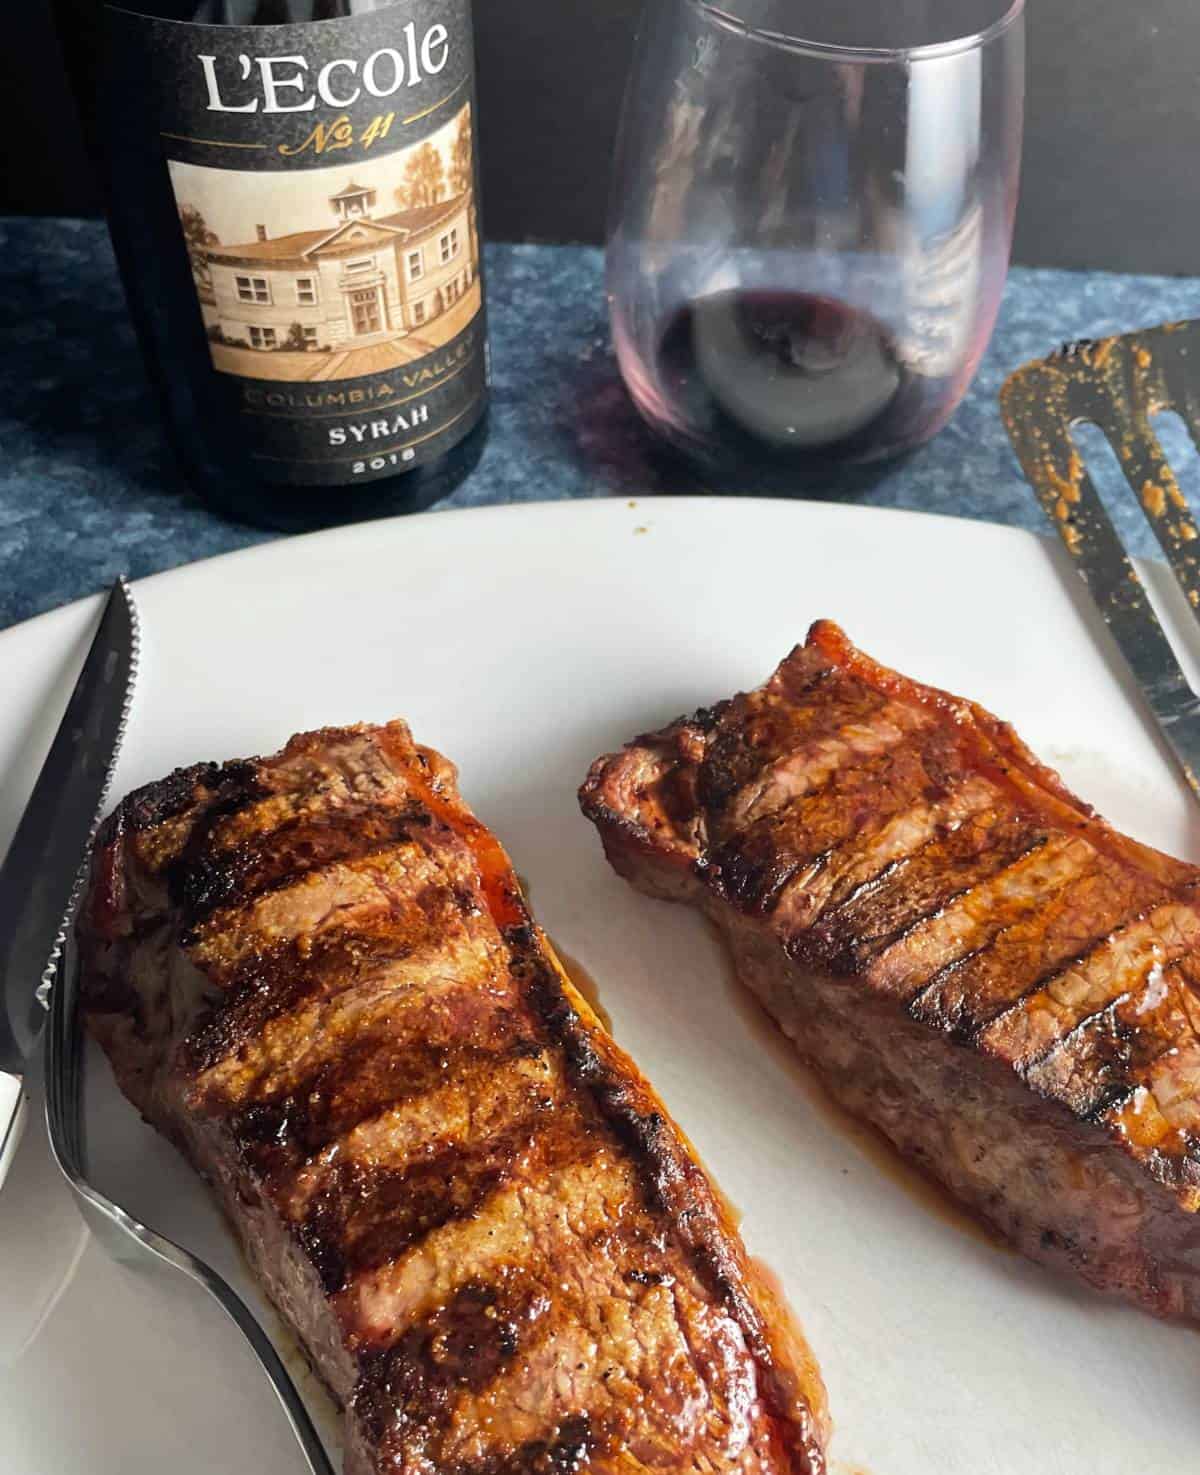 grilled NY strip steaks on a white platter, served with a Syrah red wine in the background.